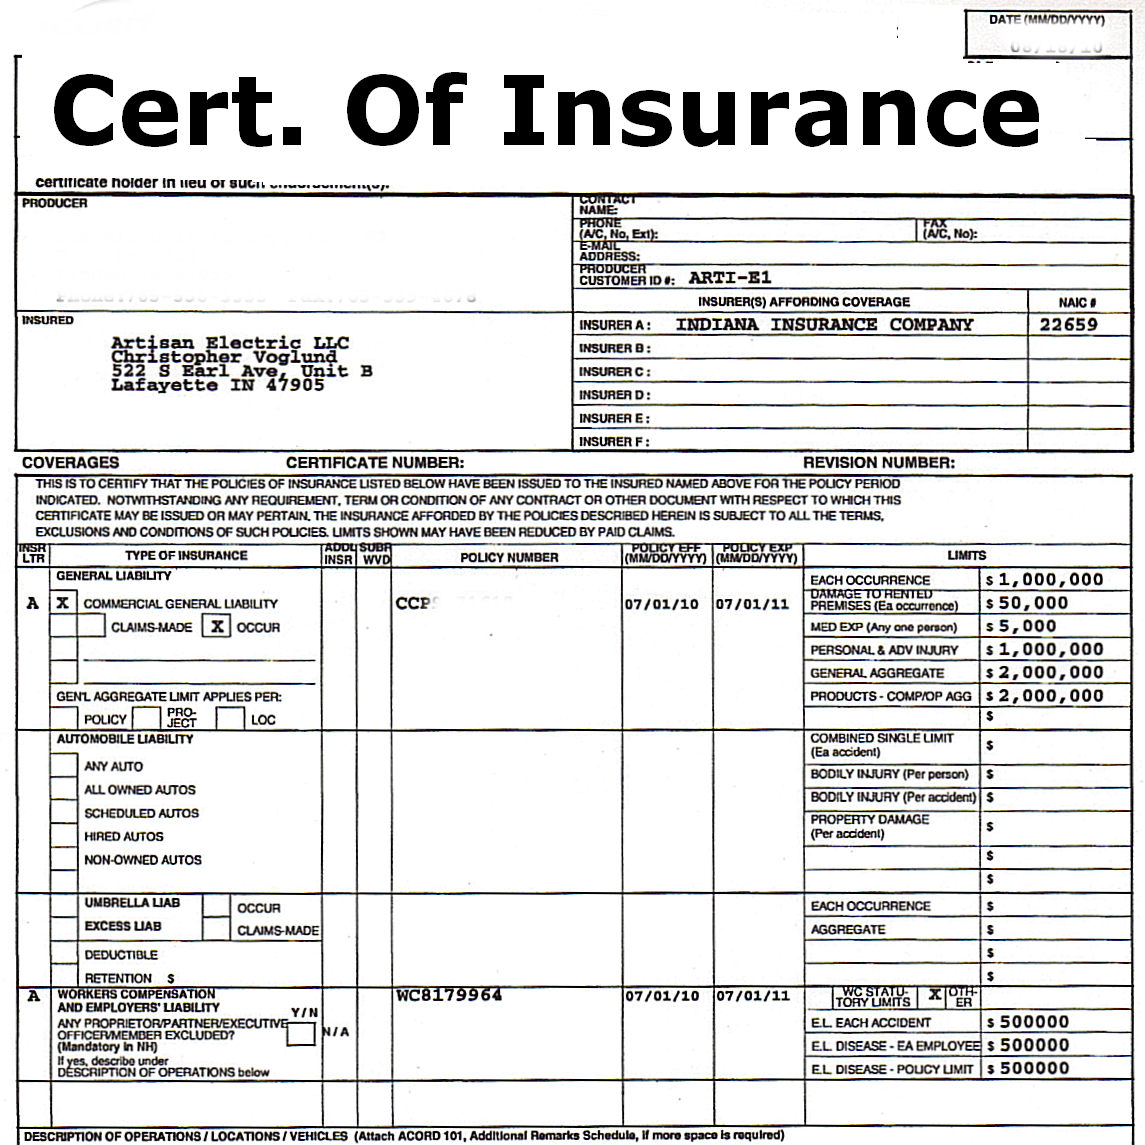 Certificate of Insurance Bounce About